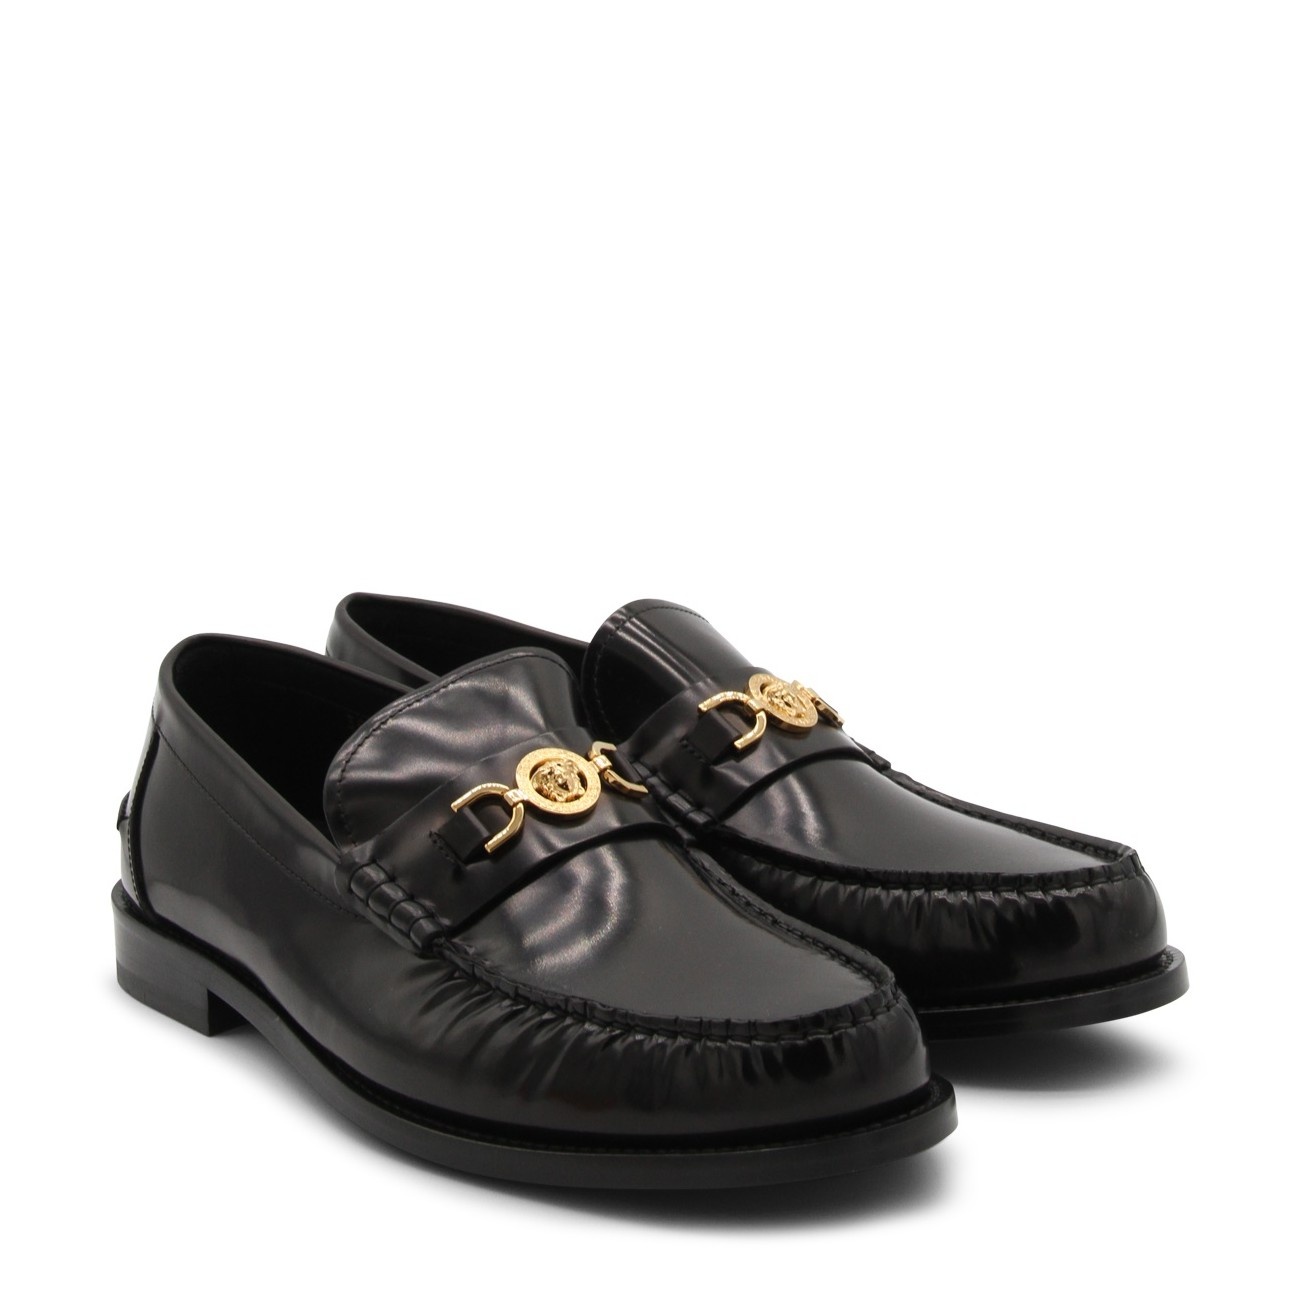 black and gold leather medusa loafers - 2